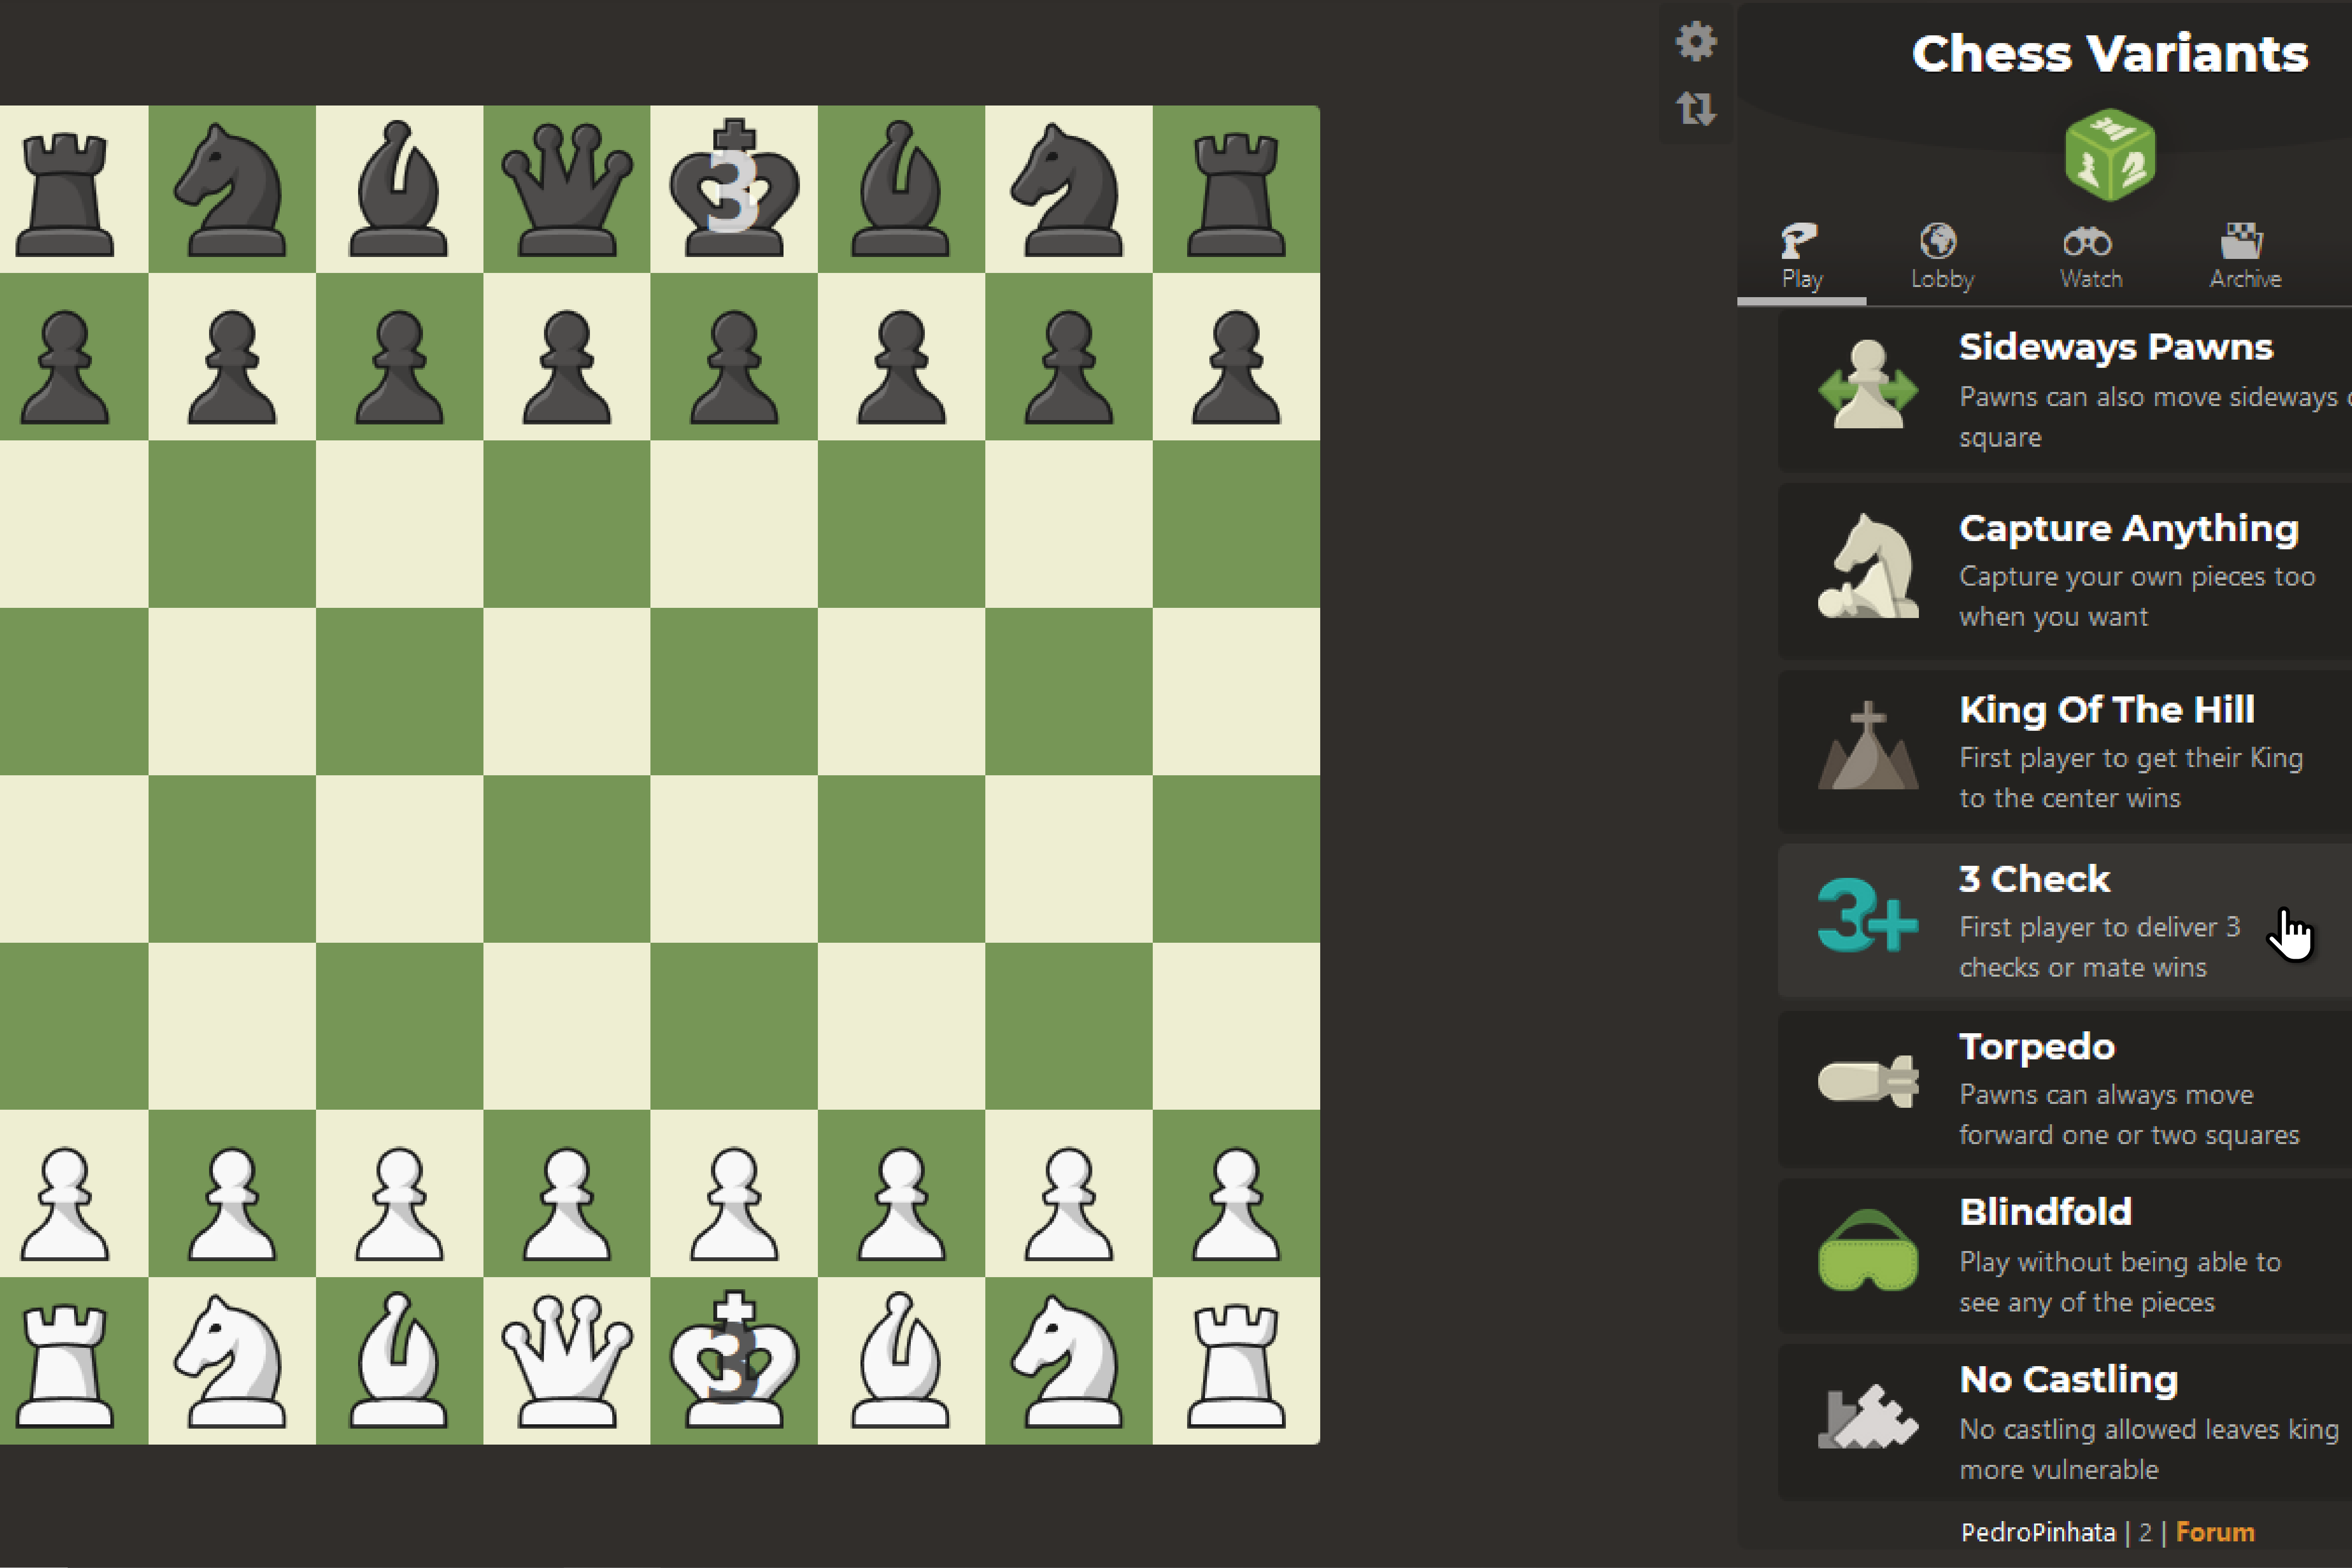 The best websites to play chess online